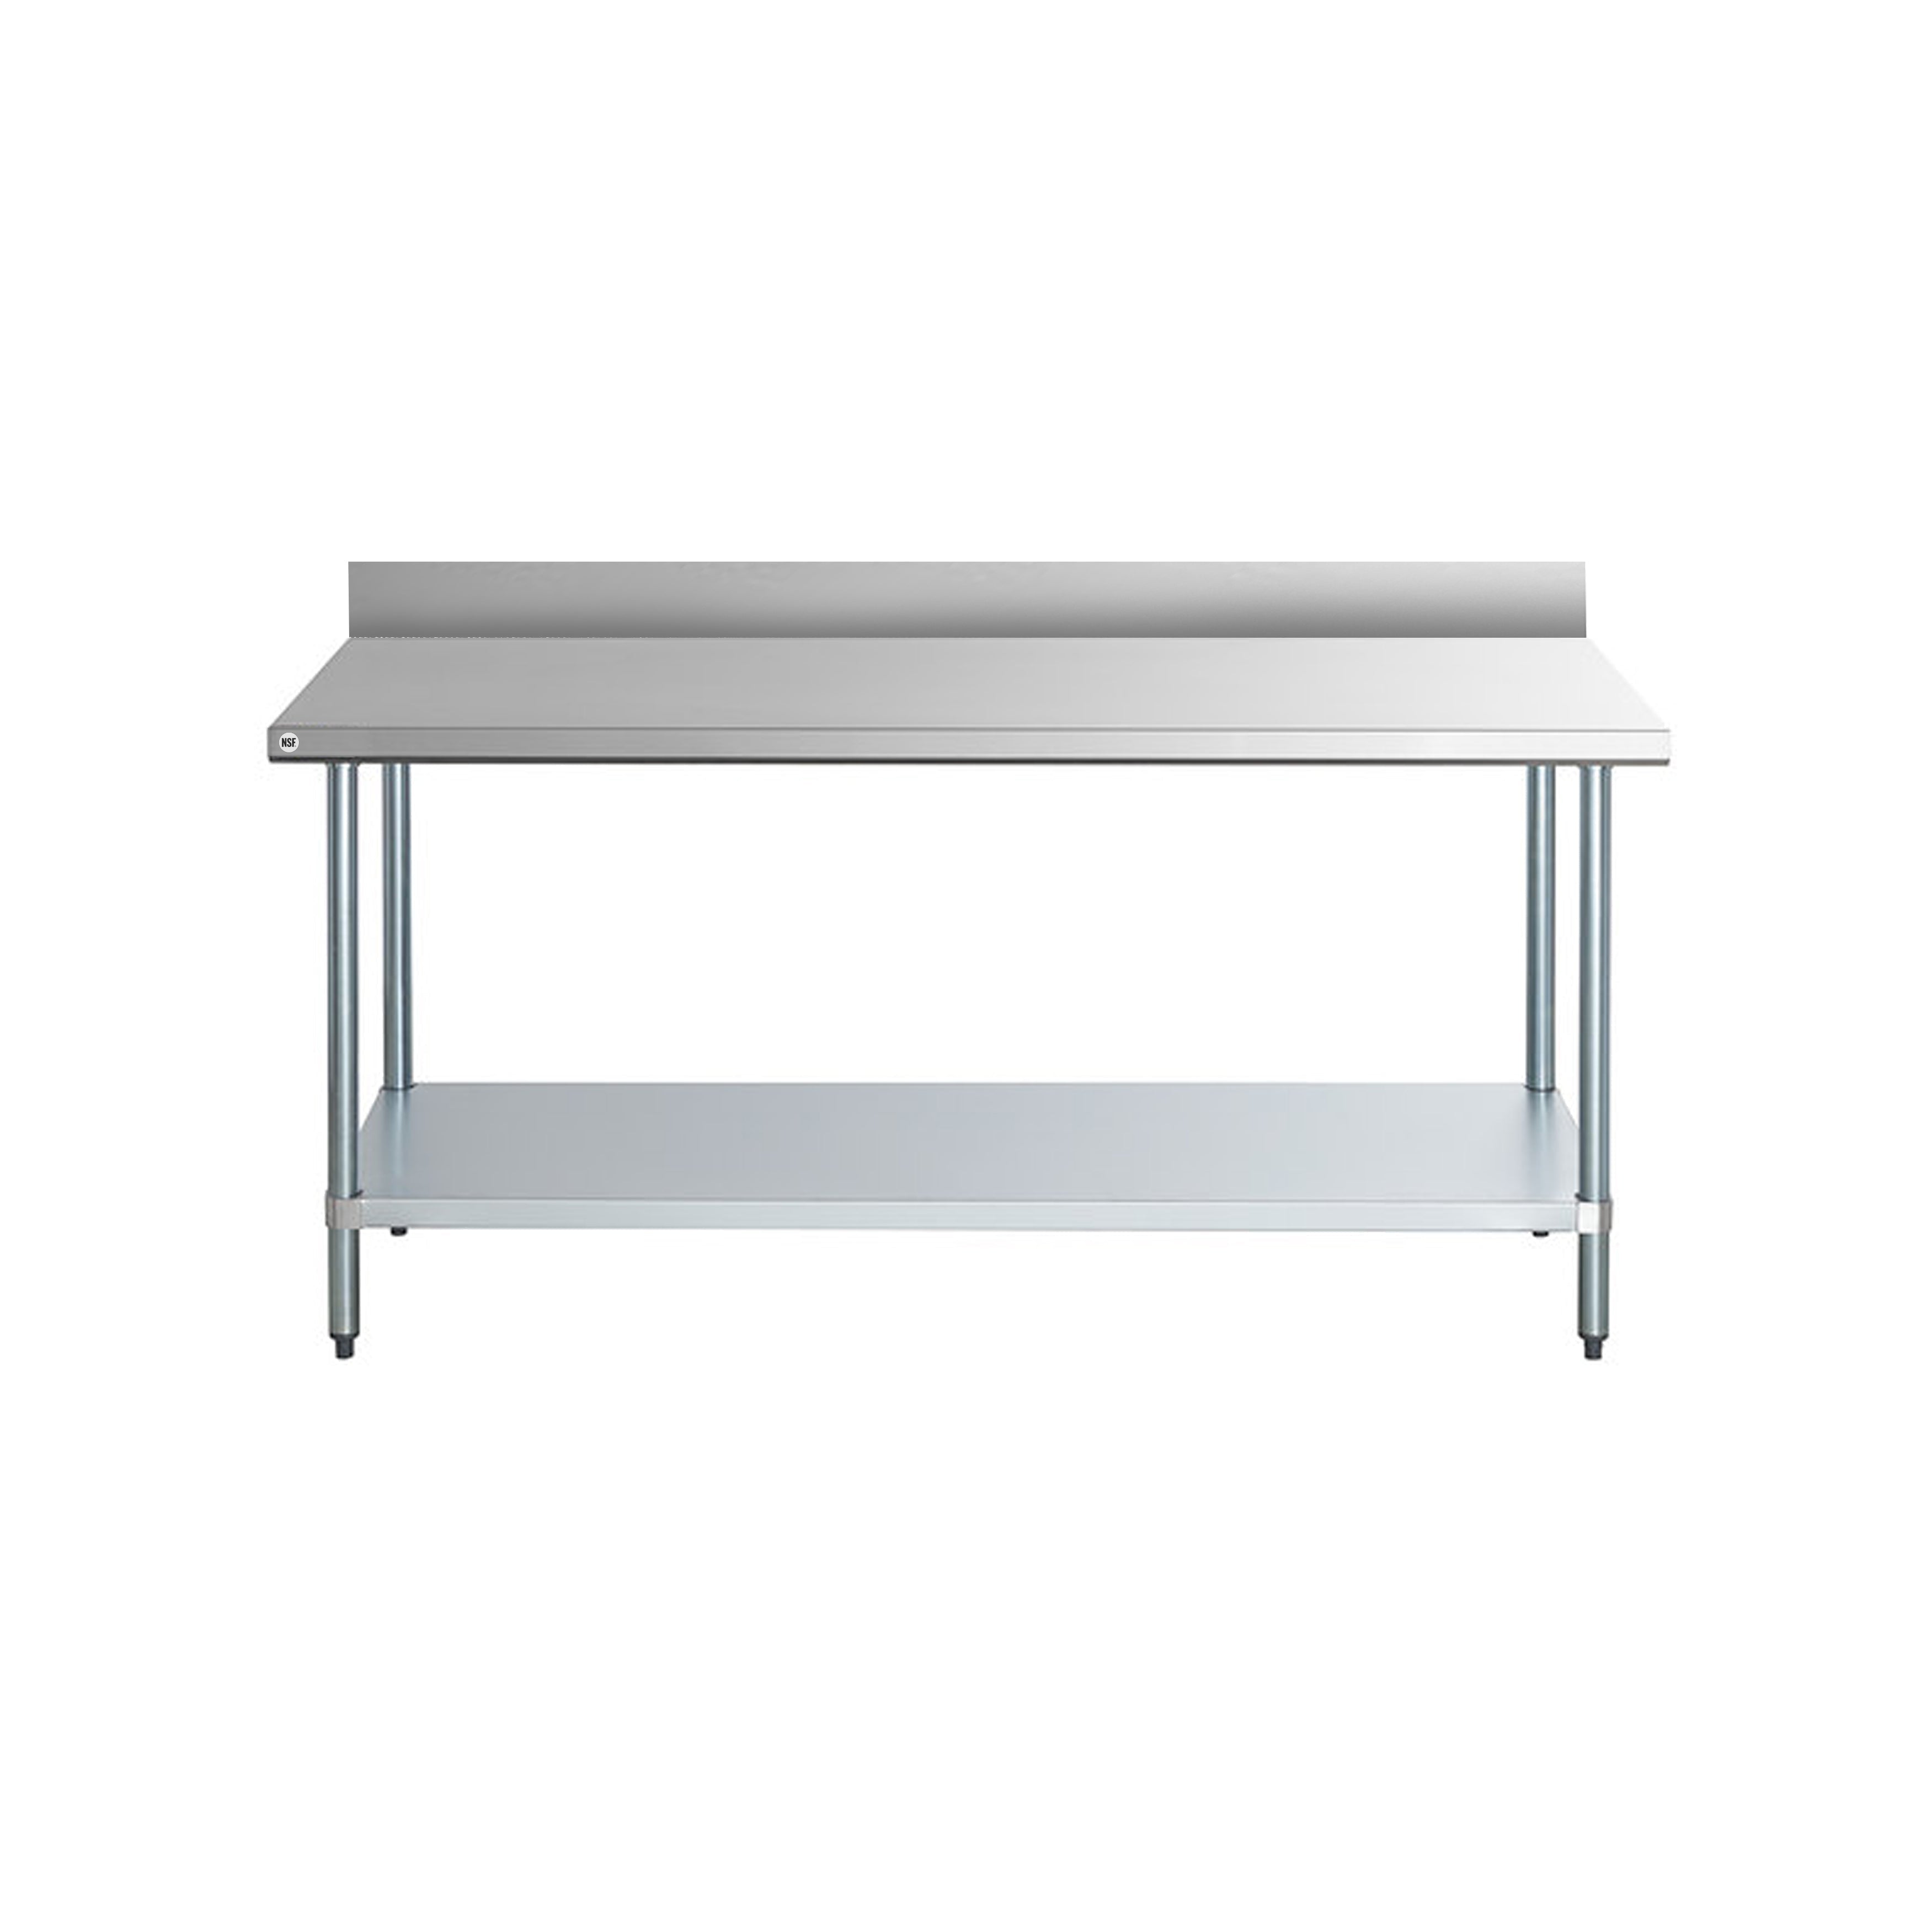 Omcan - 22090, Commercial 30" x 72" Stainless Steel Kitchen Work Table with 4" BackSplash 1300lbs Light Duty